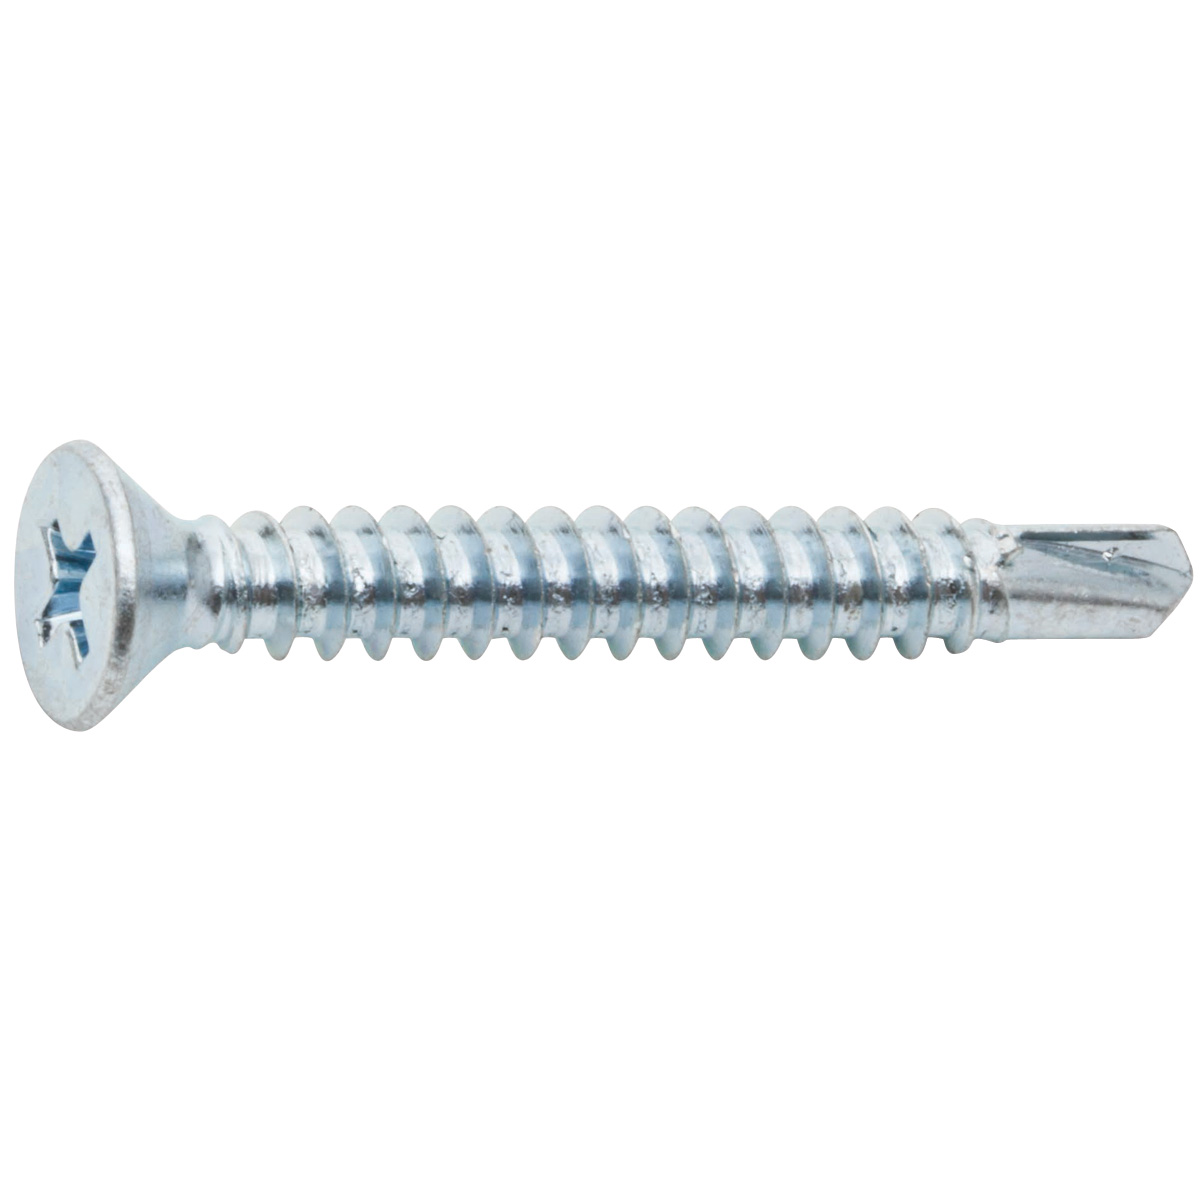 #3 Drill Point Pack of 25 1/4-14 Thread Size 2-1/2 Length Small Parts 1440KPF Phillips Drive 82 Degree Flat Head 2-1/2 Length Zinc Plated Finish Pack of 25 Steel Self-Drilling Screw 1/4-14 Thread Size